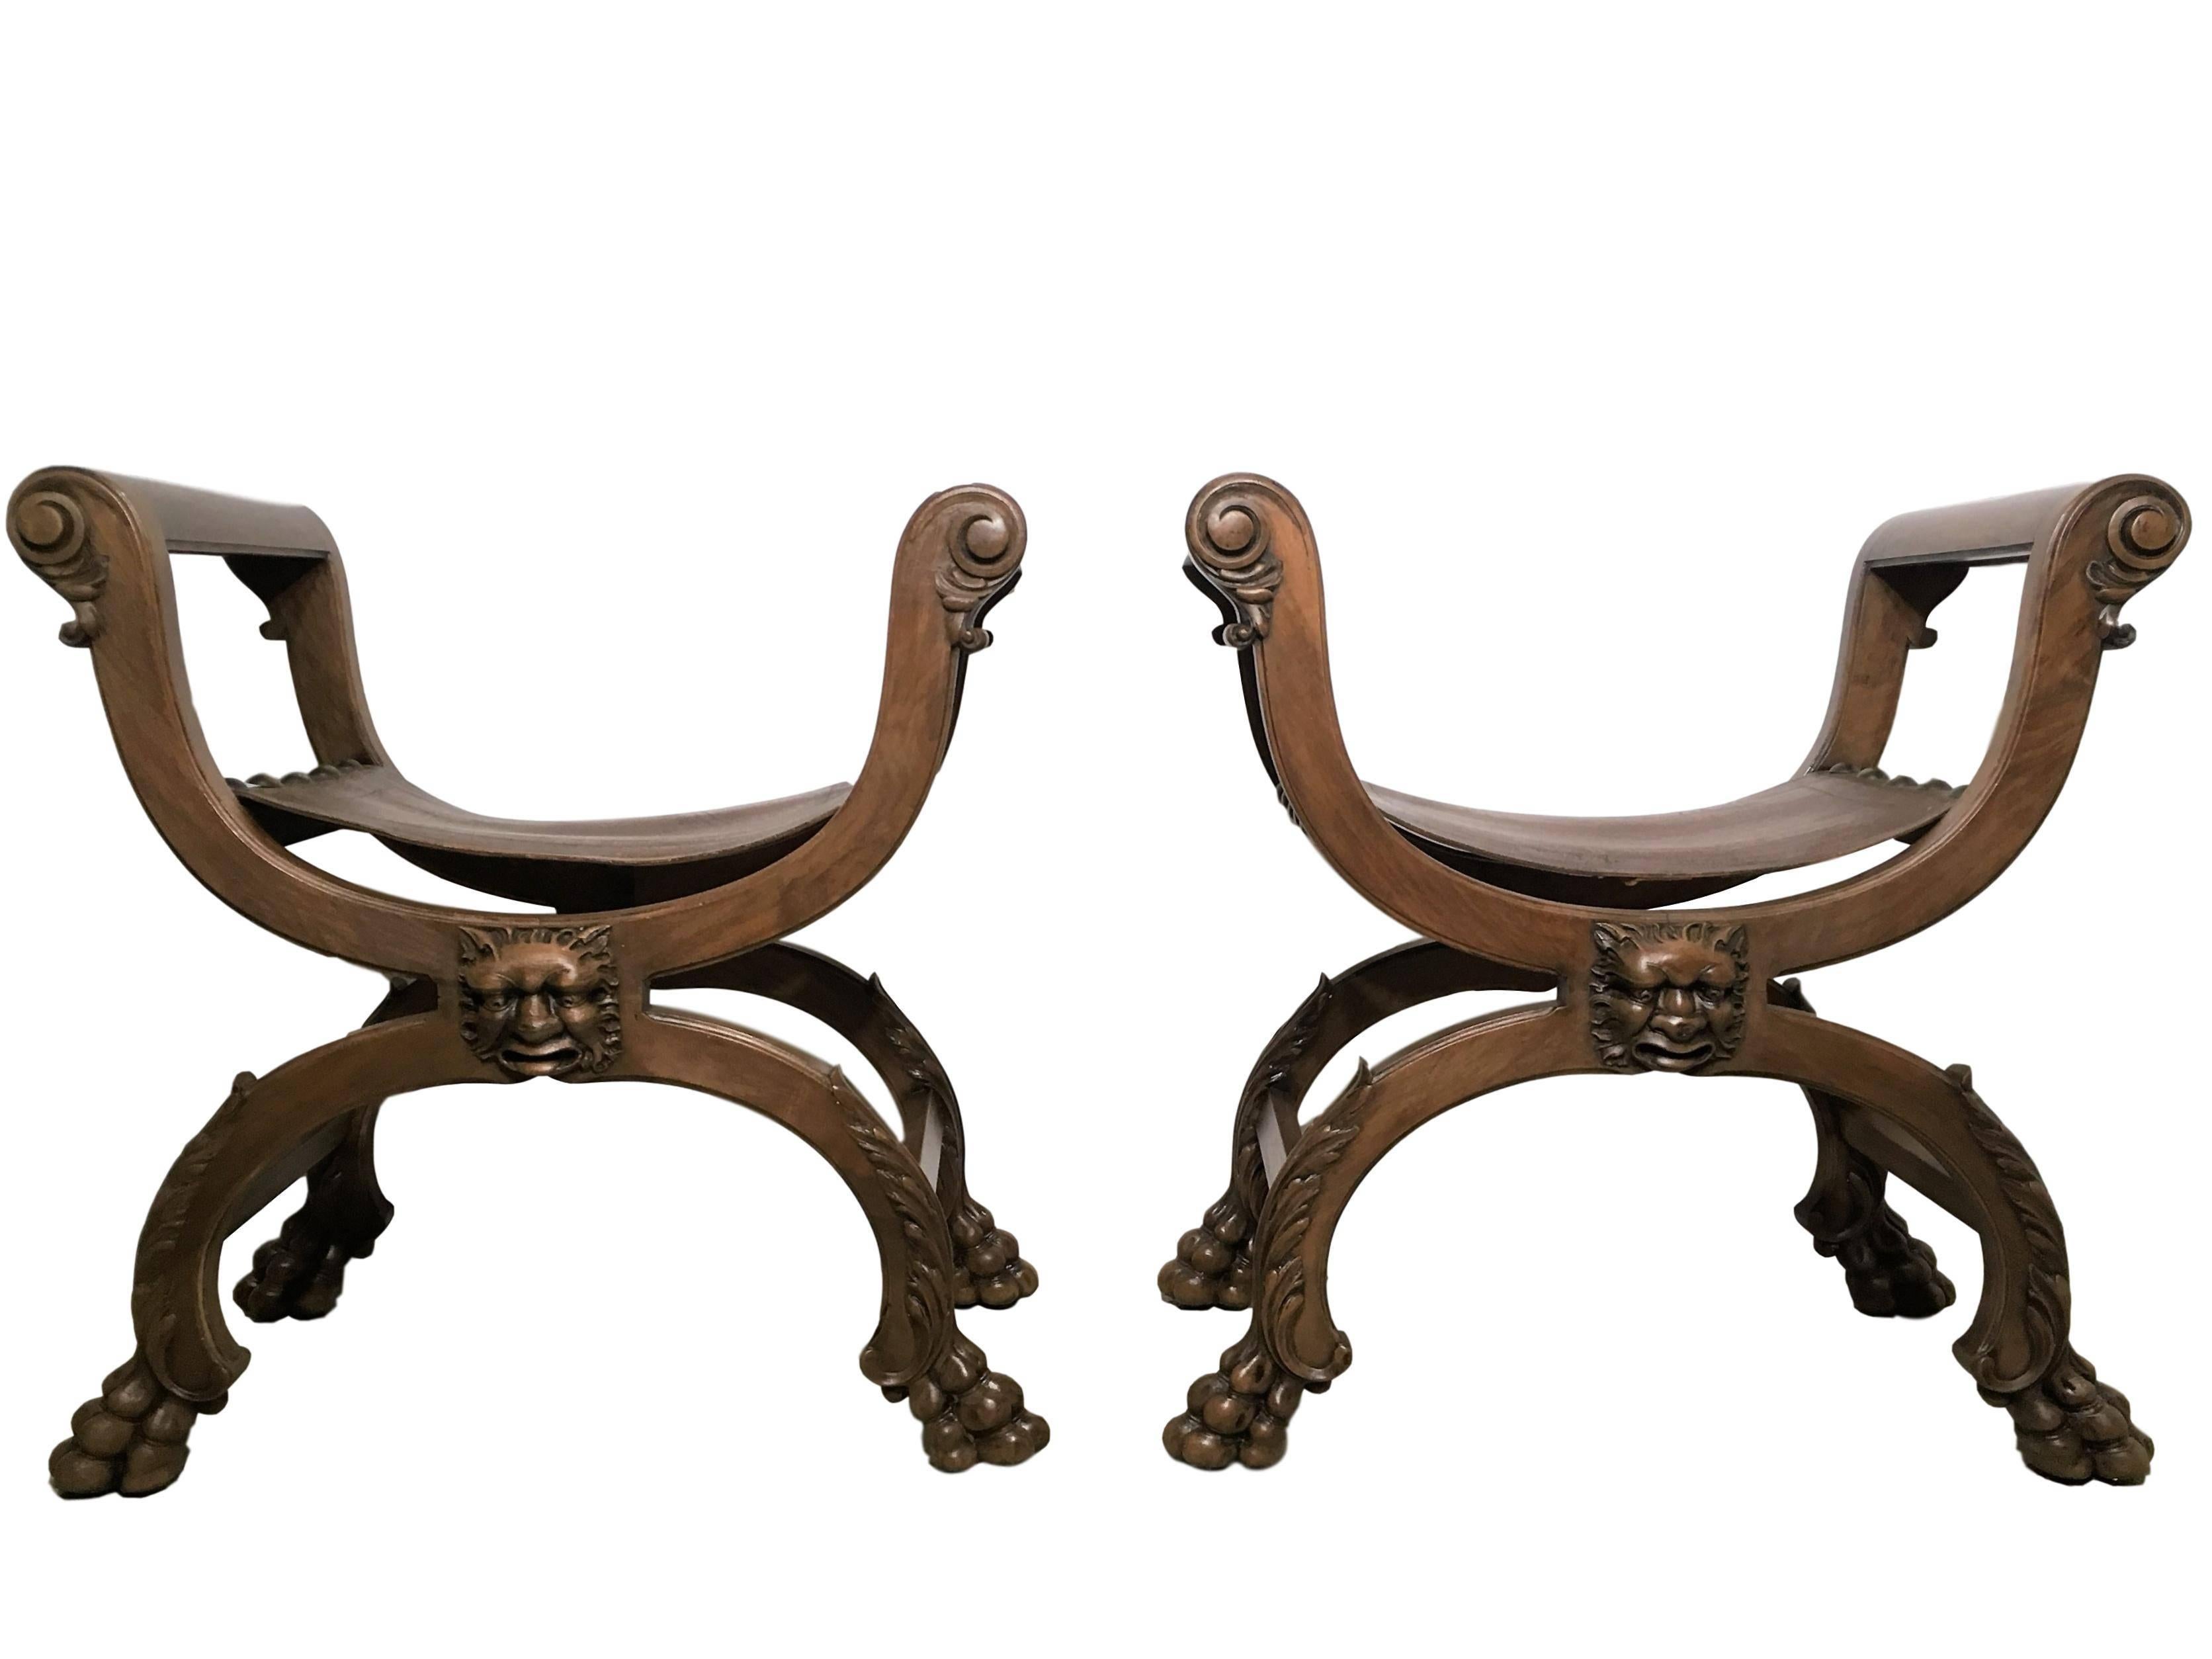 19th century period Gustavian pair of benches, Savonarolas, carved rams head and hoof with original leather seat.